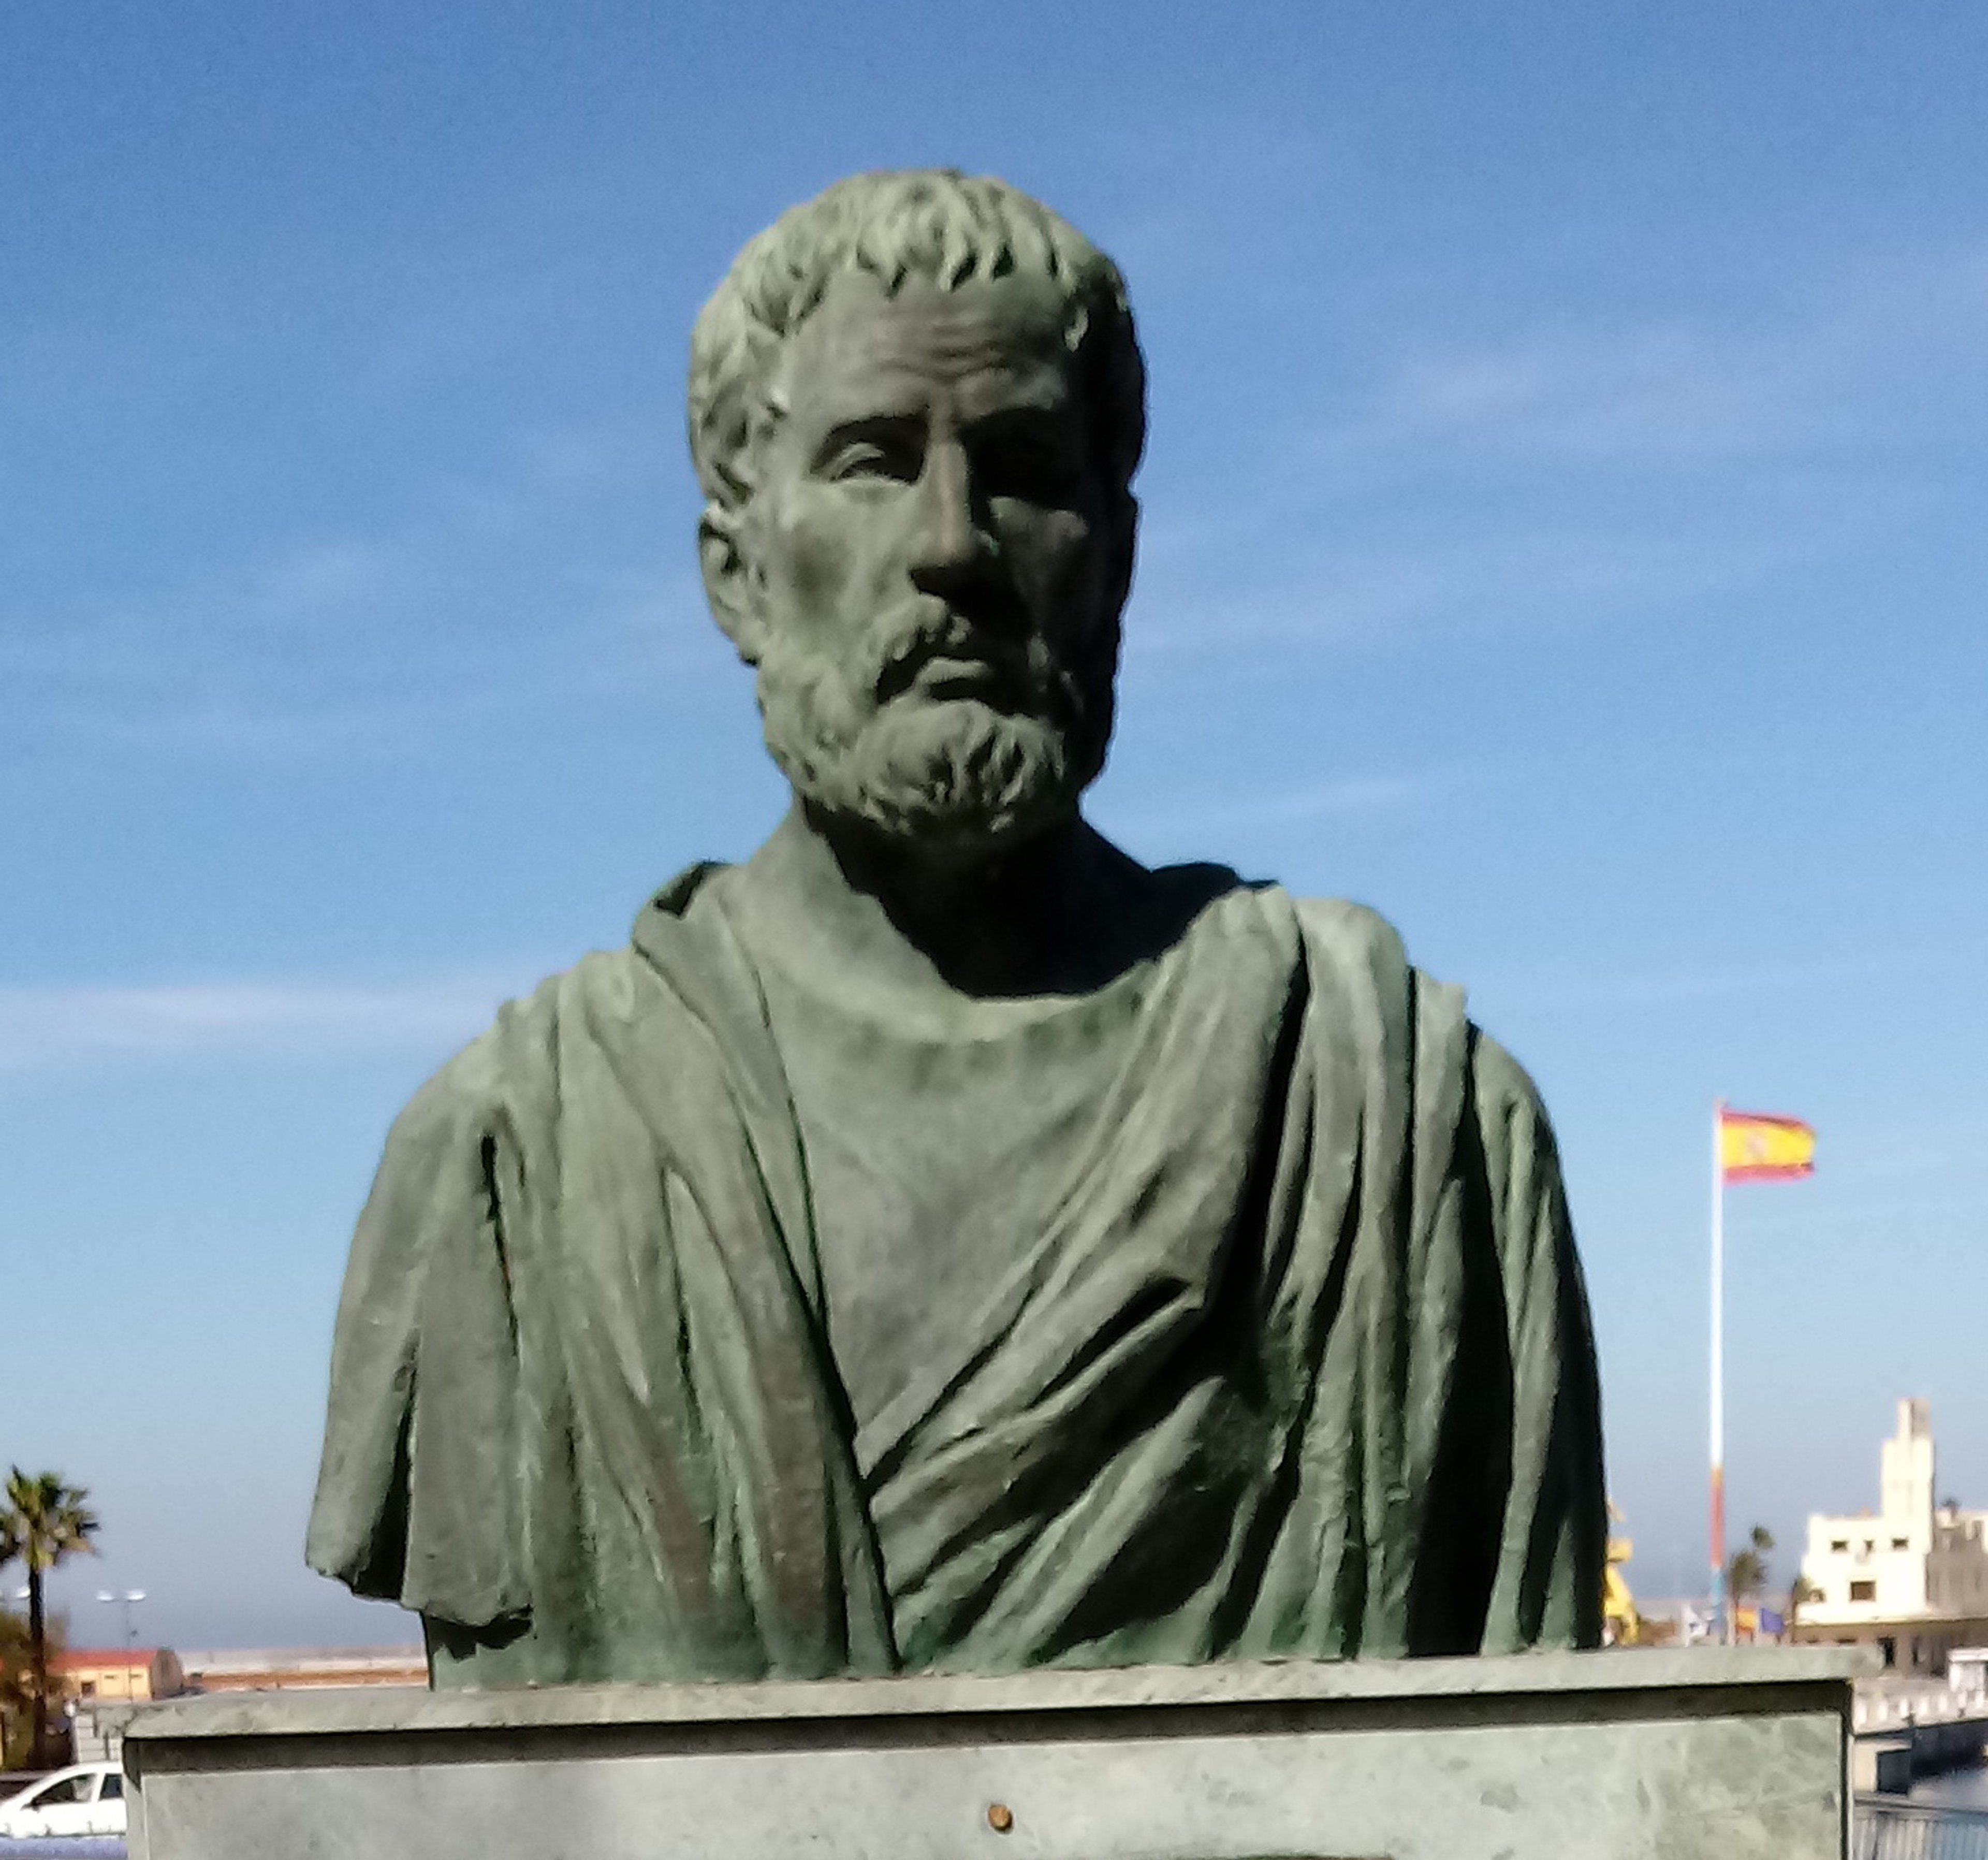 Bust of Roman geographer, Pomponius Mela, a man with short hair and a beard, wearing robes.